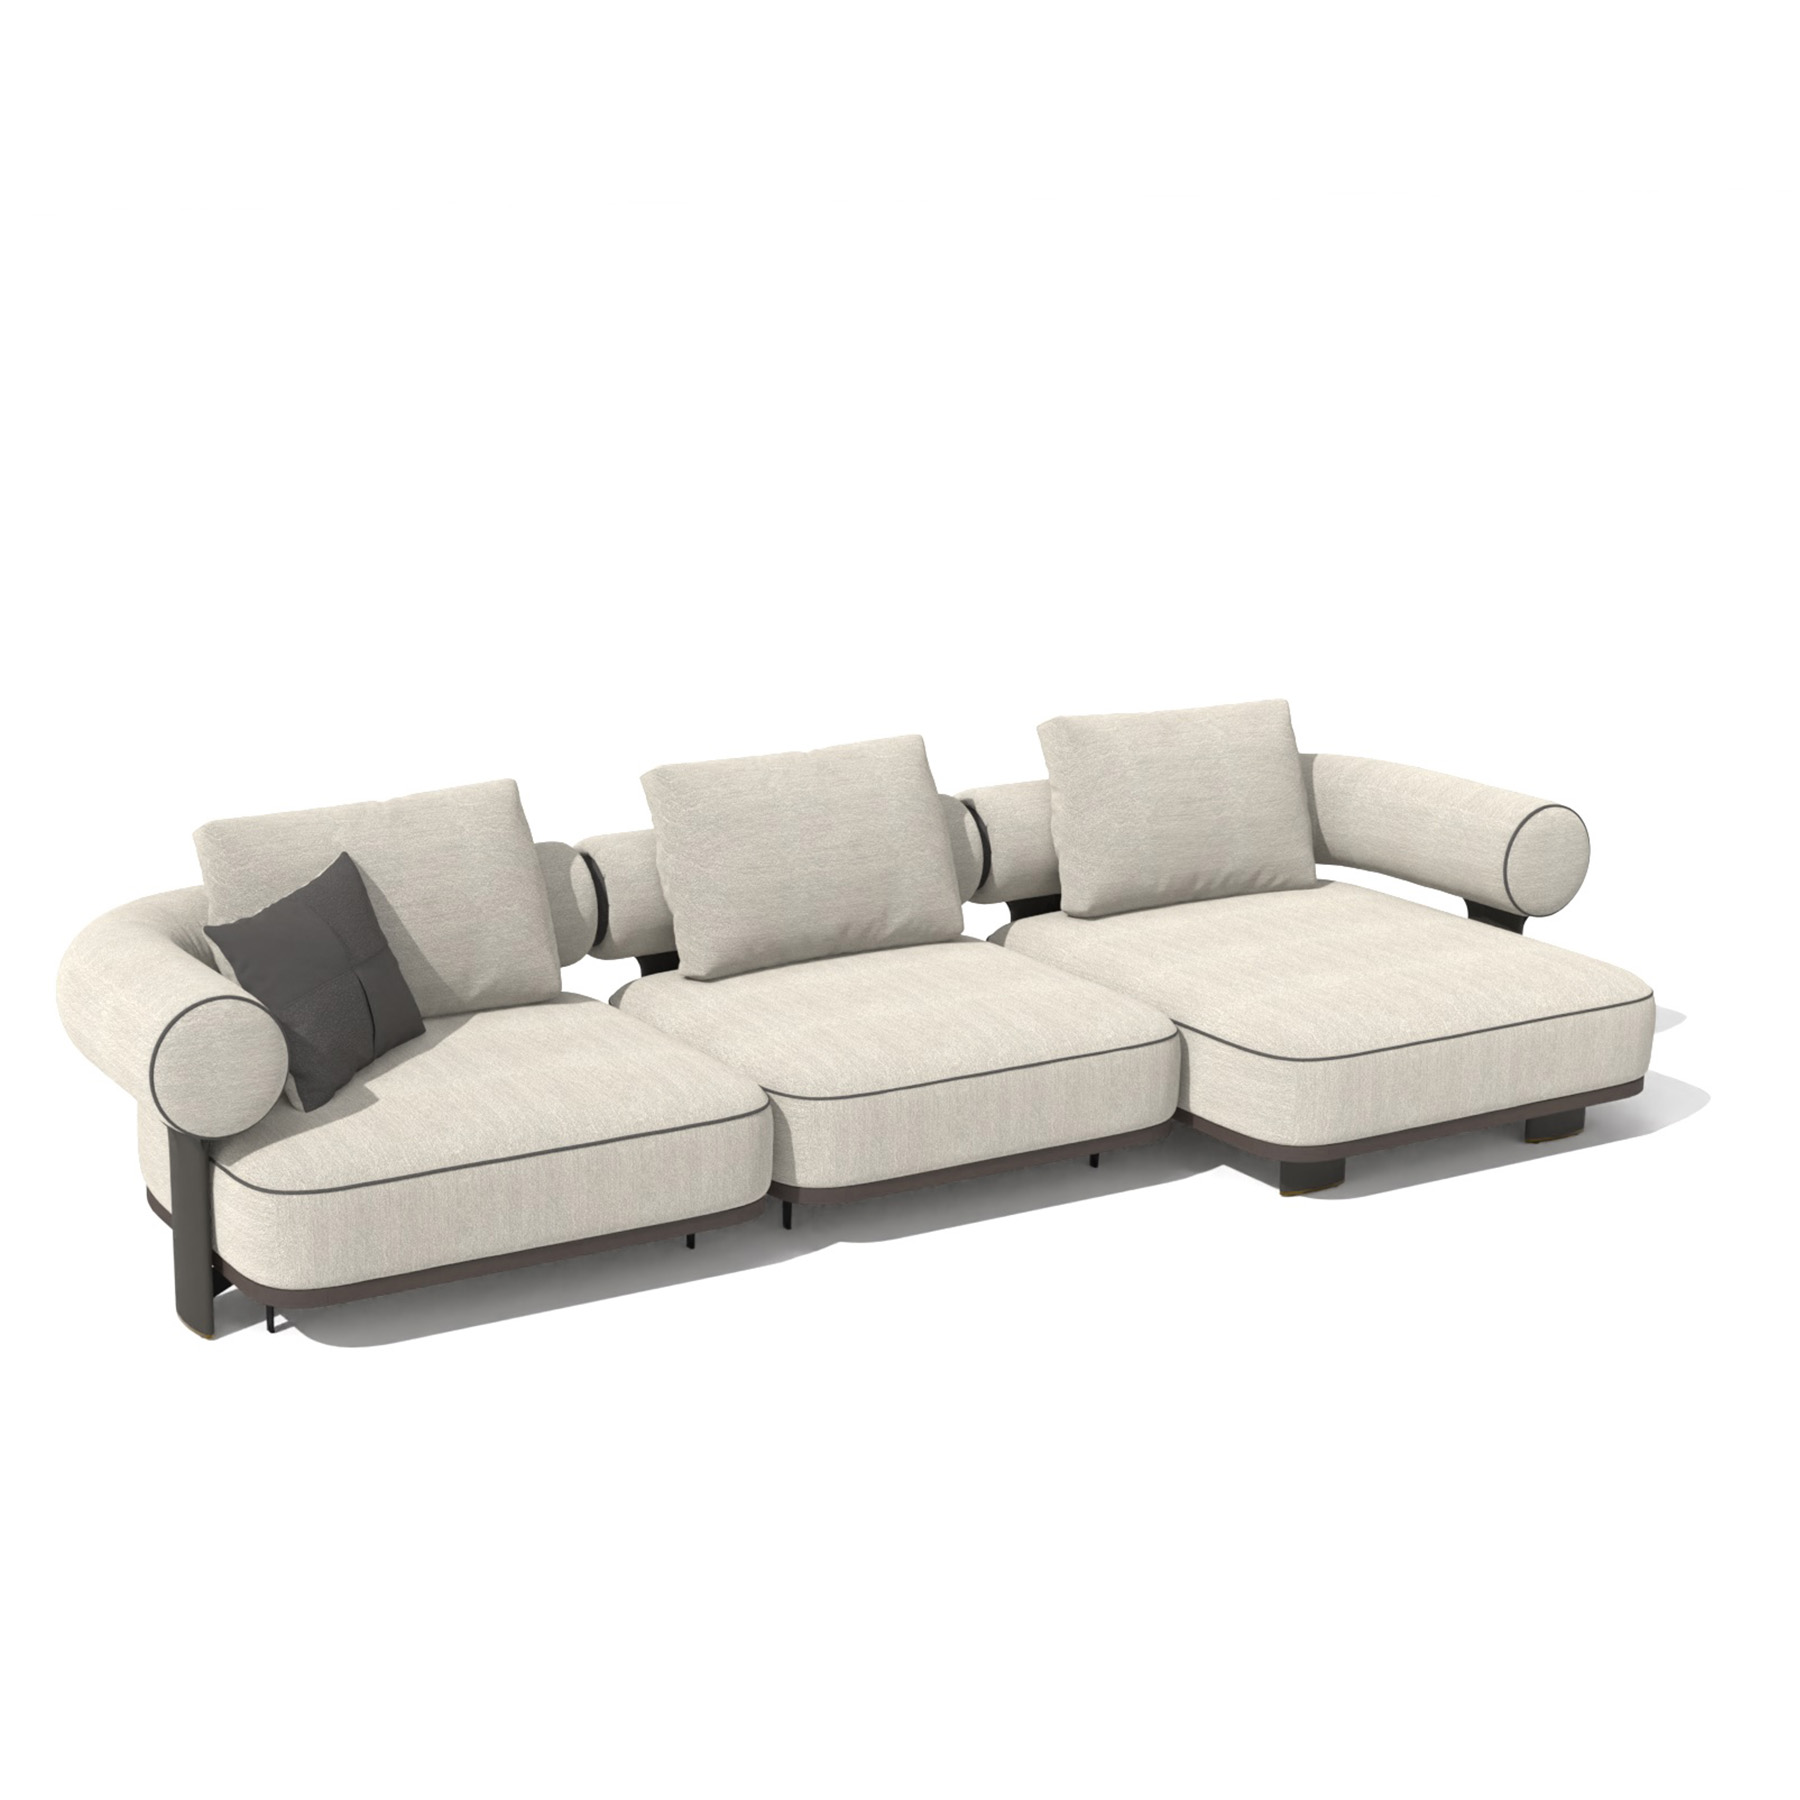 kyoto high end large modular sectional sofa in white fabric unique design option11